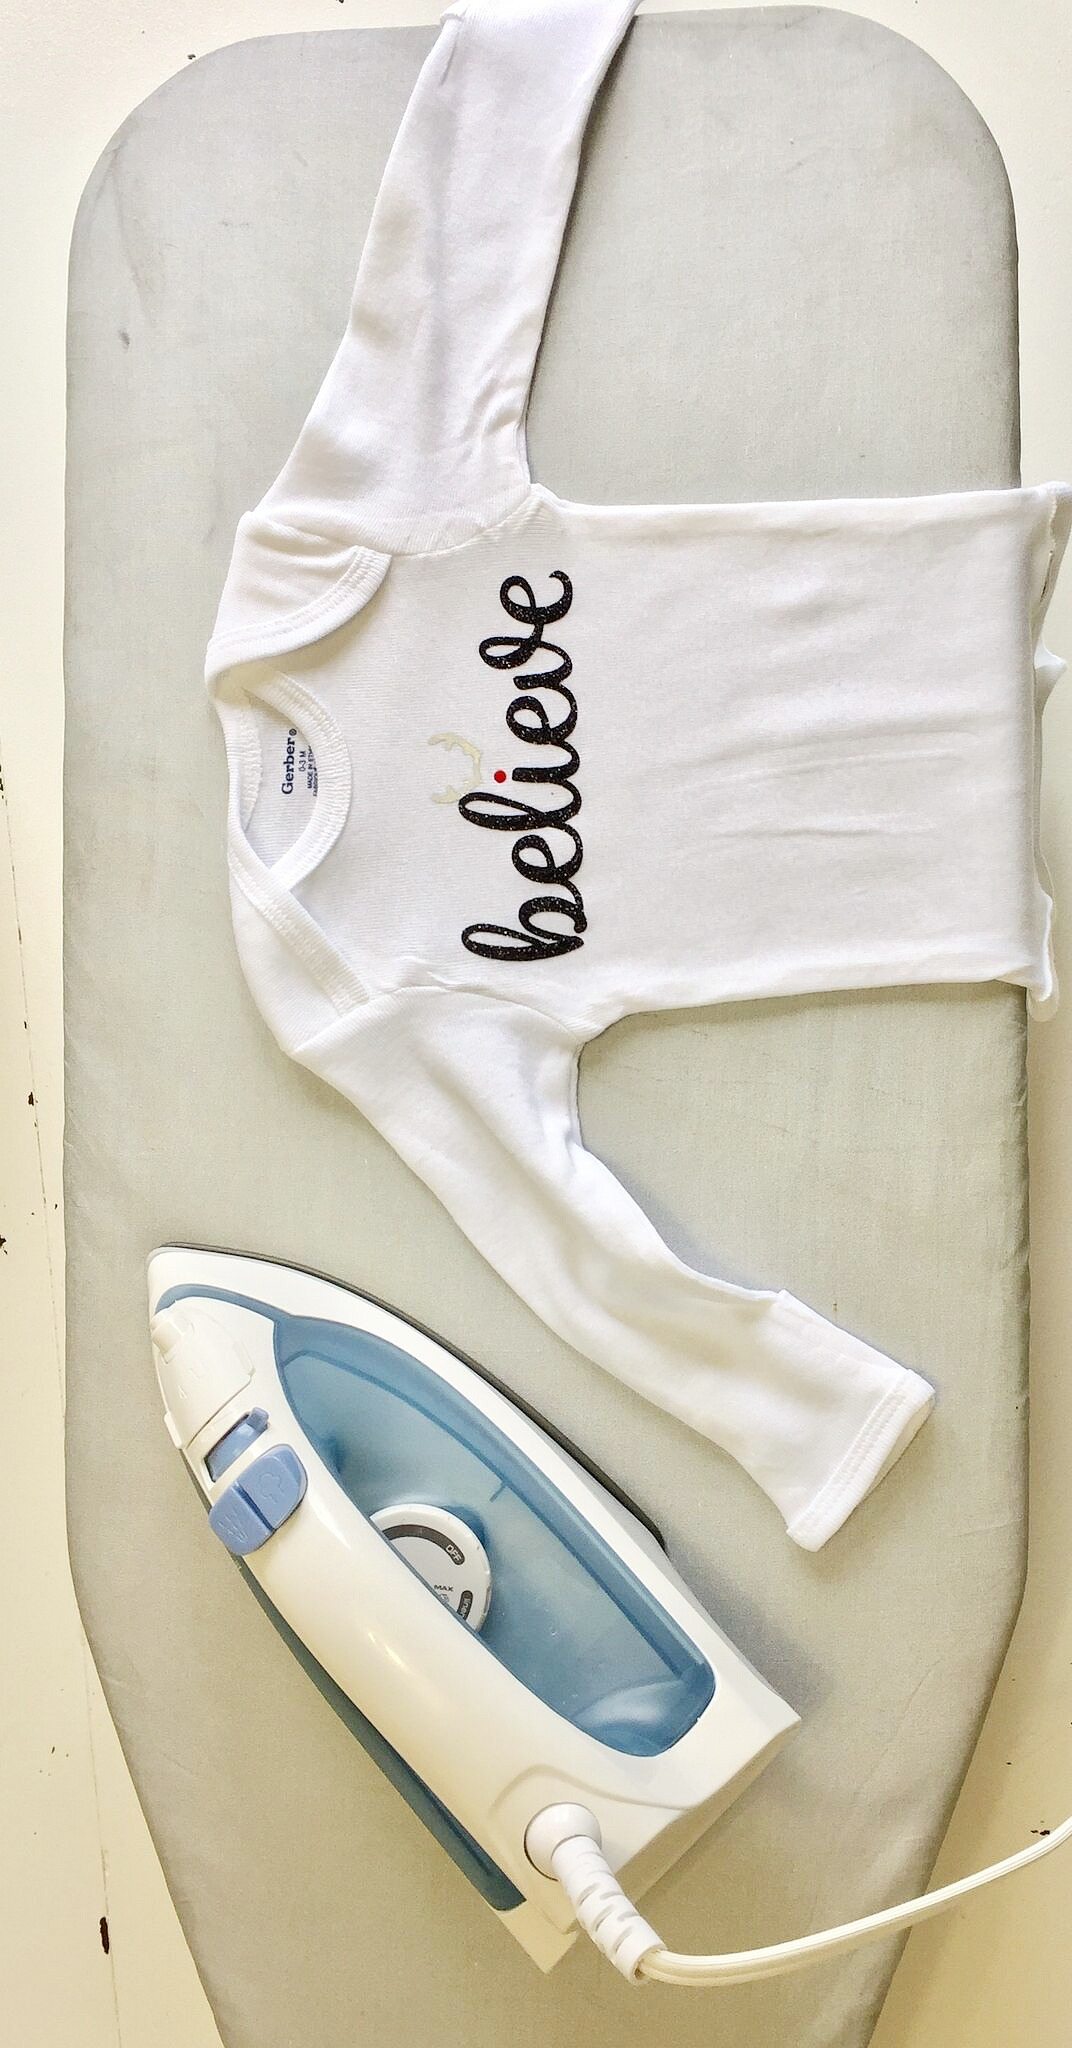 Make this cute onesie for Christmas